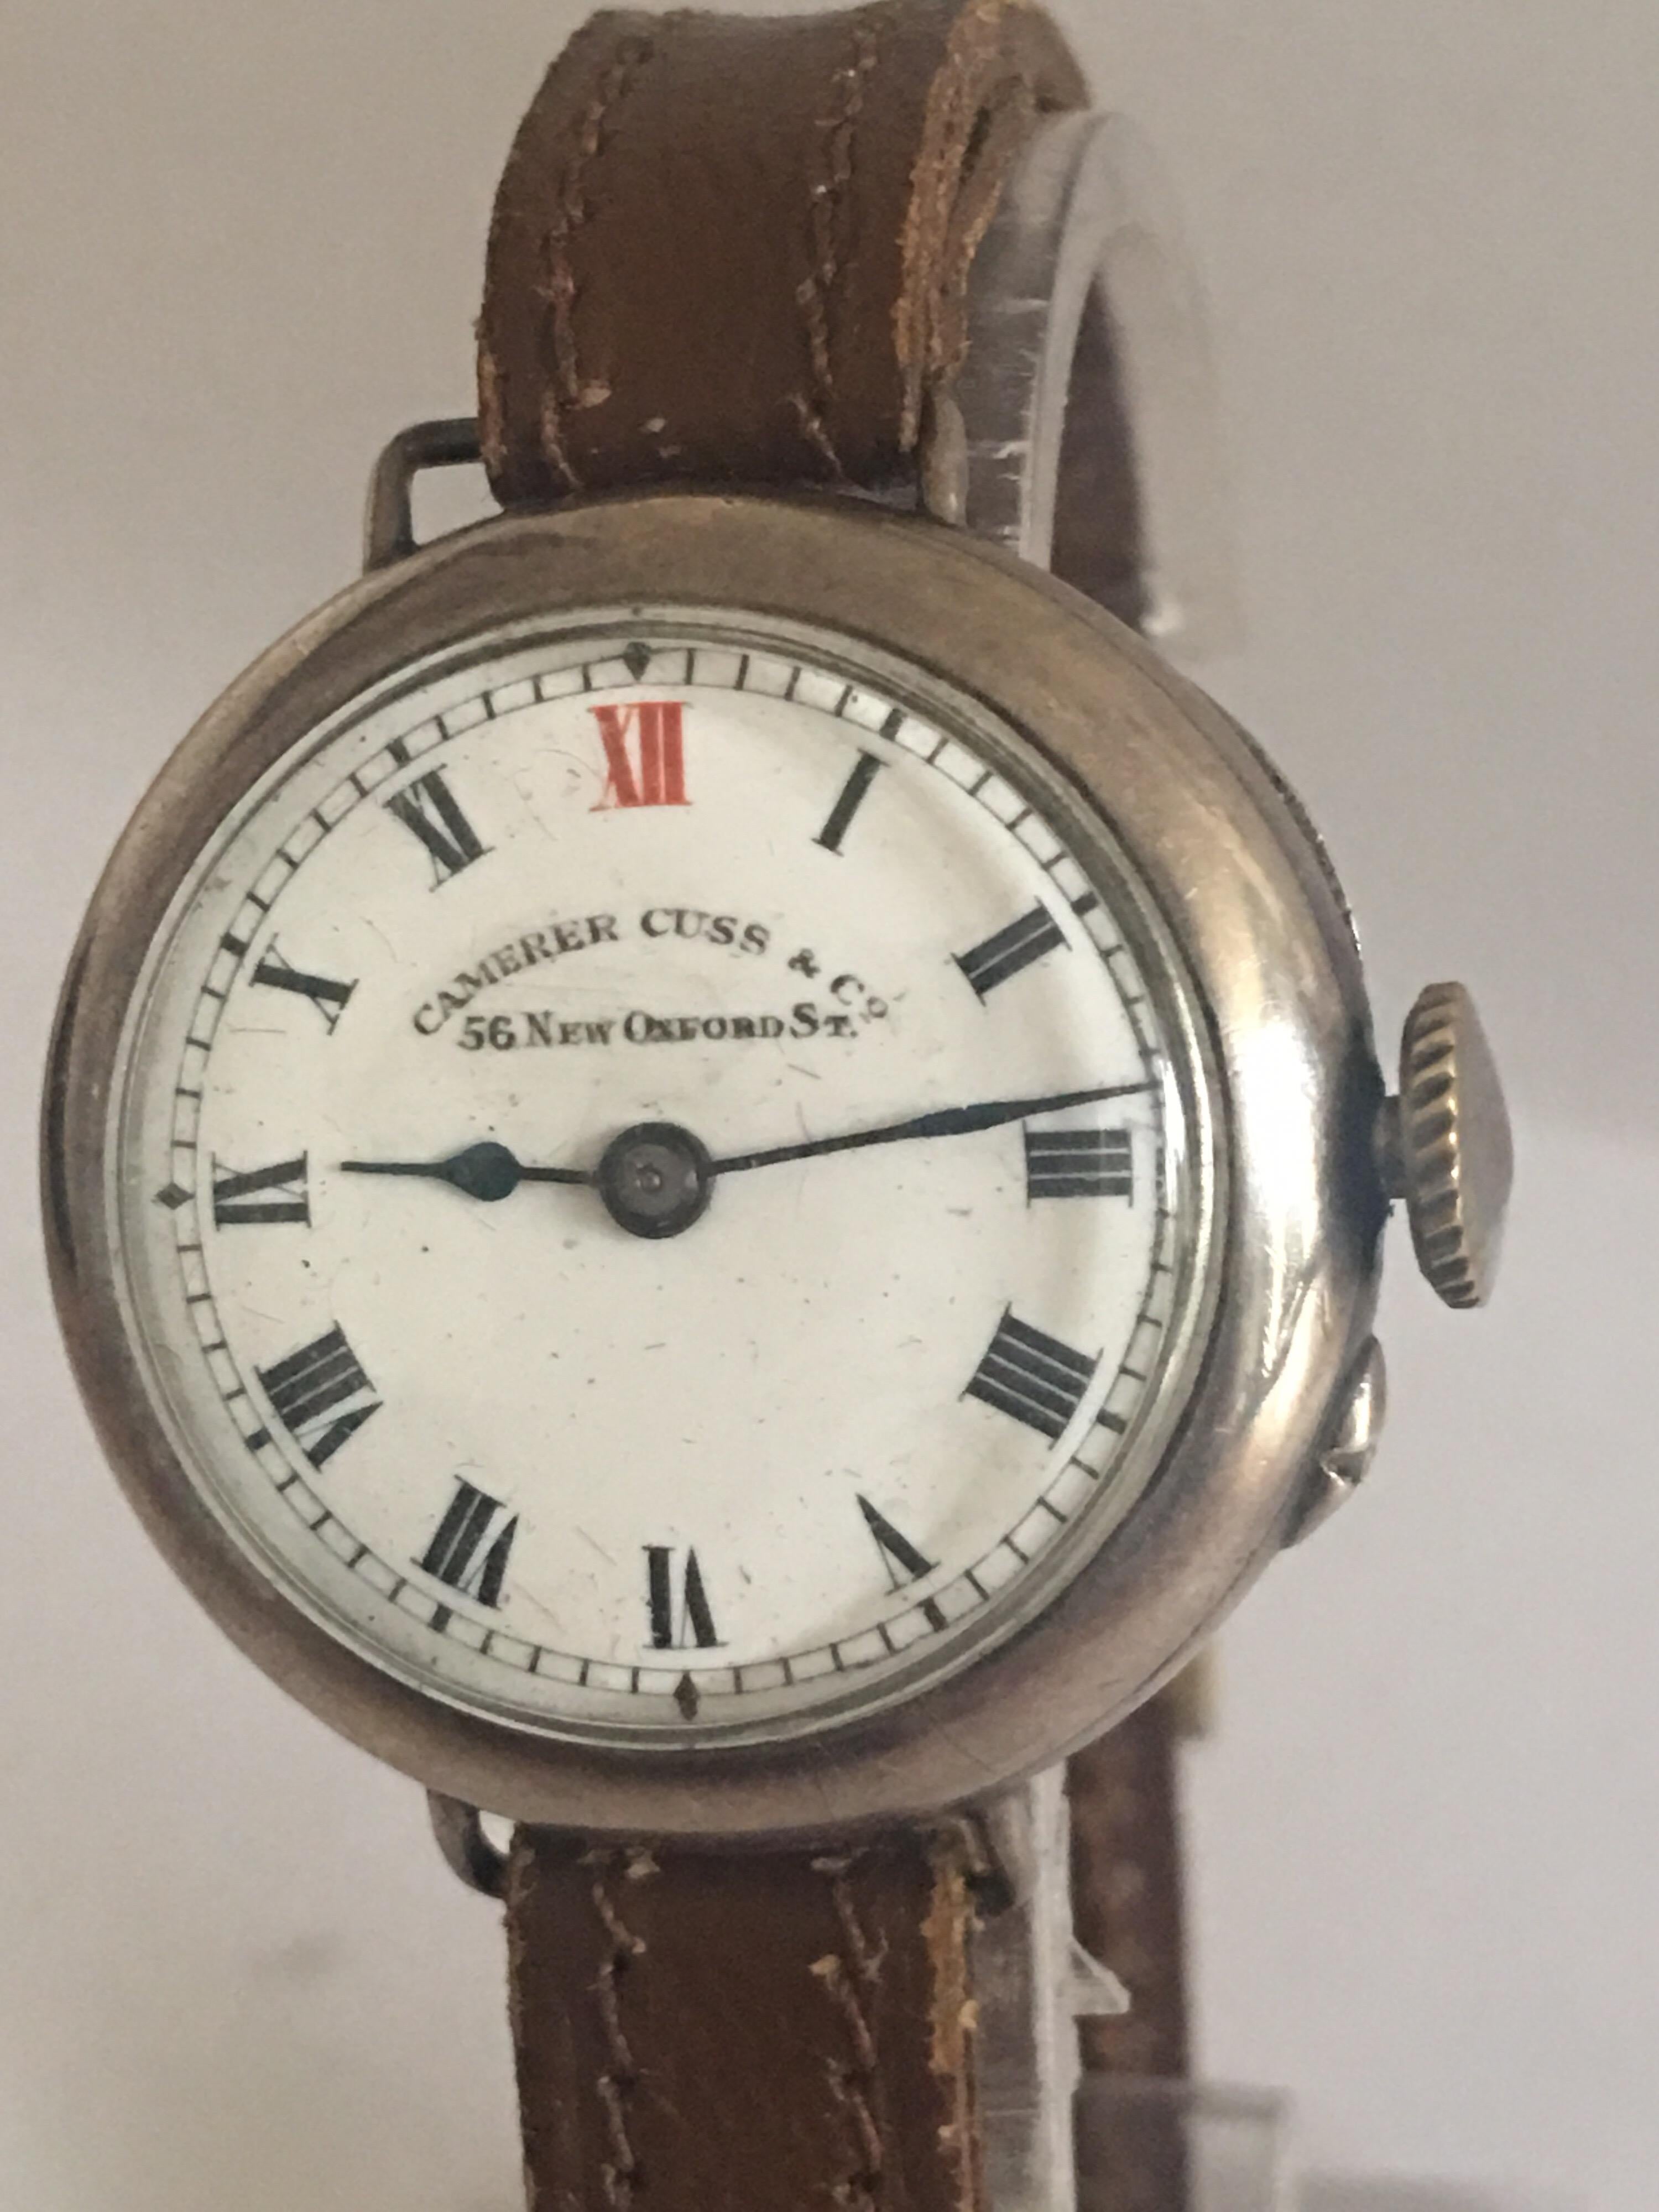 Antique Camerer Cuss & Co. Silver Trench Watch 5